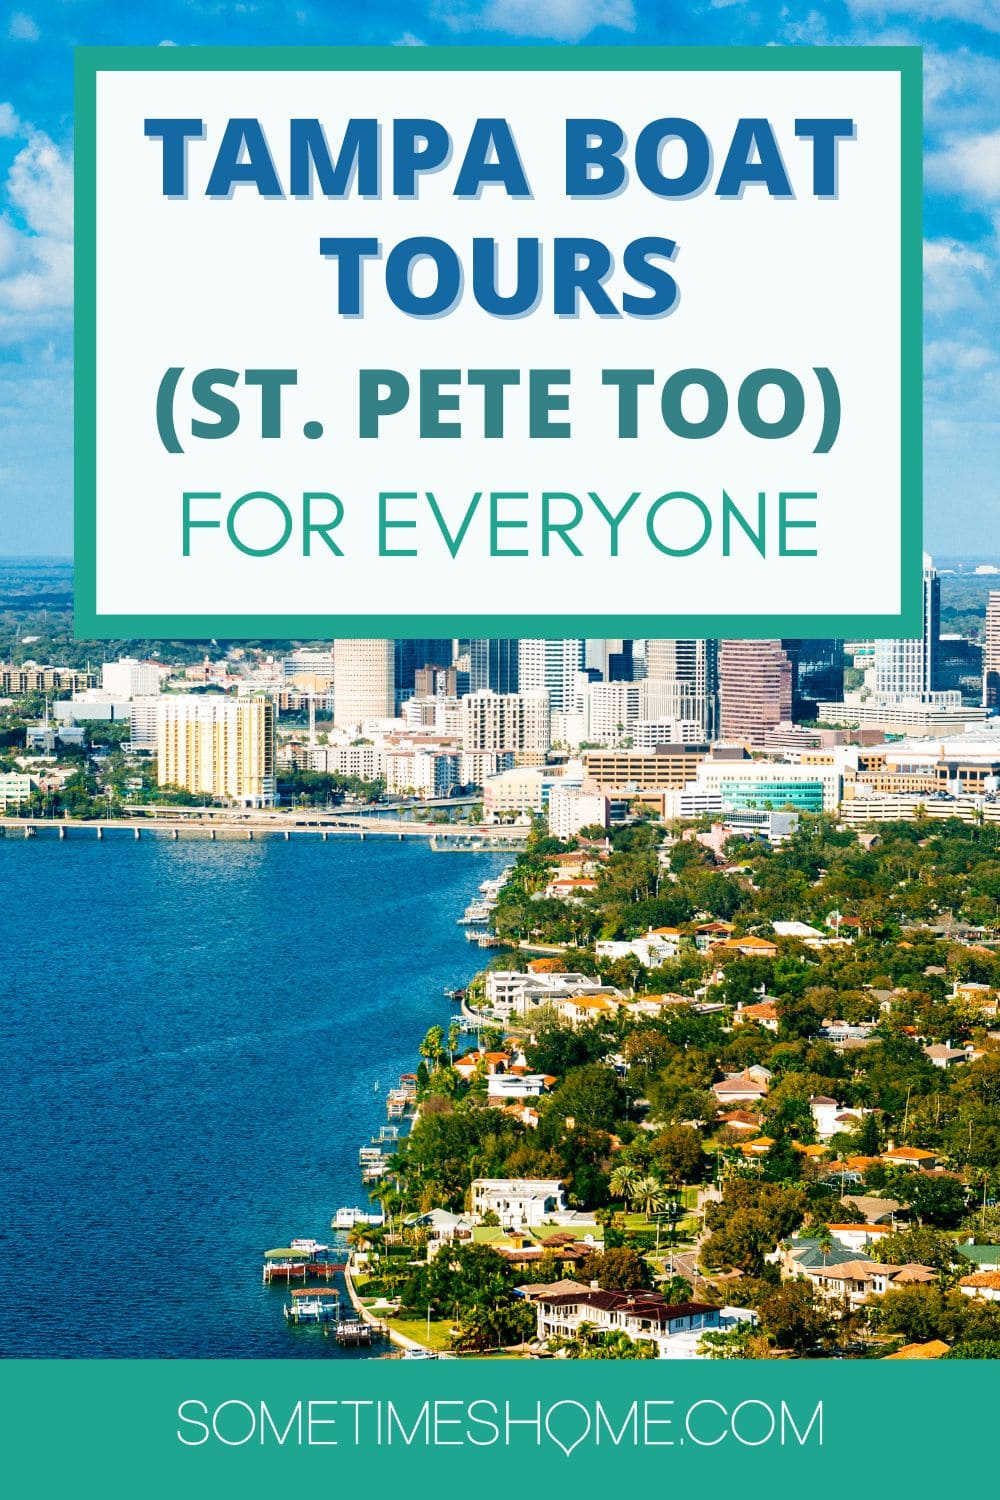 Tampa Boat Tours (St. Pete too) for Everyone, with an aerial view of Tampa Bay and the skyline.